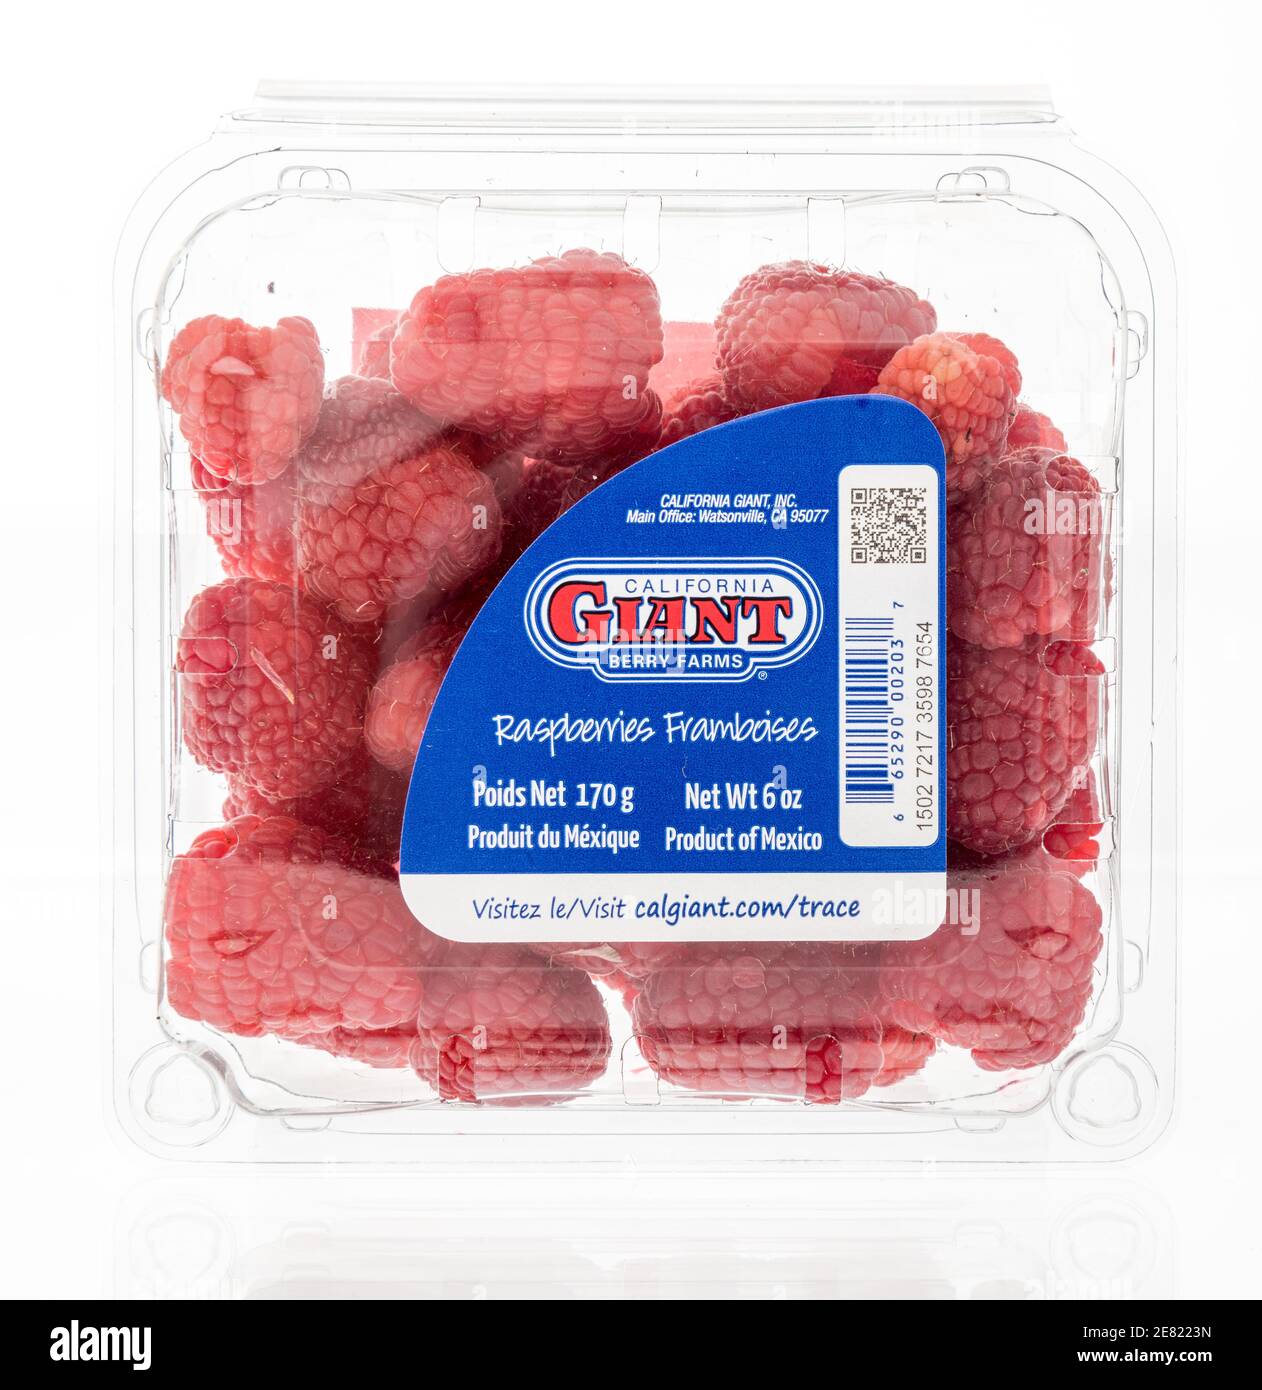 Winneconne, WI -23 January 2021: A package of California giant berry farms raspberries on an isolated background. Stock Photo